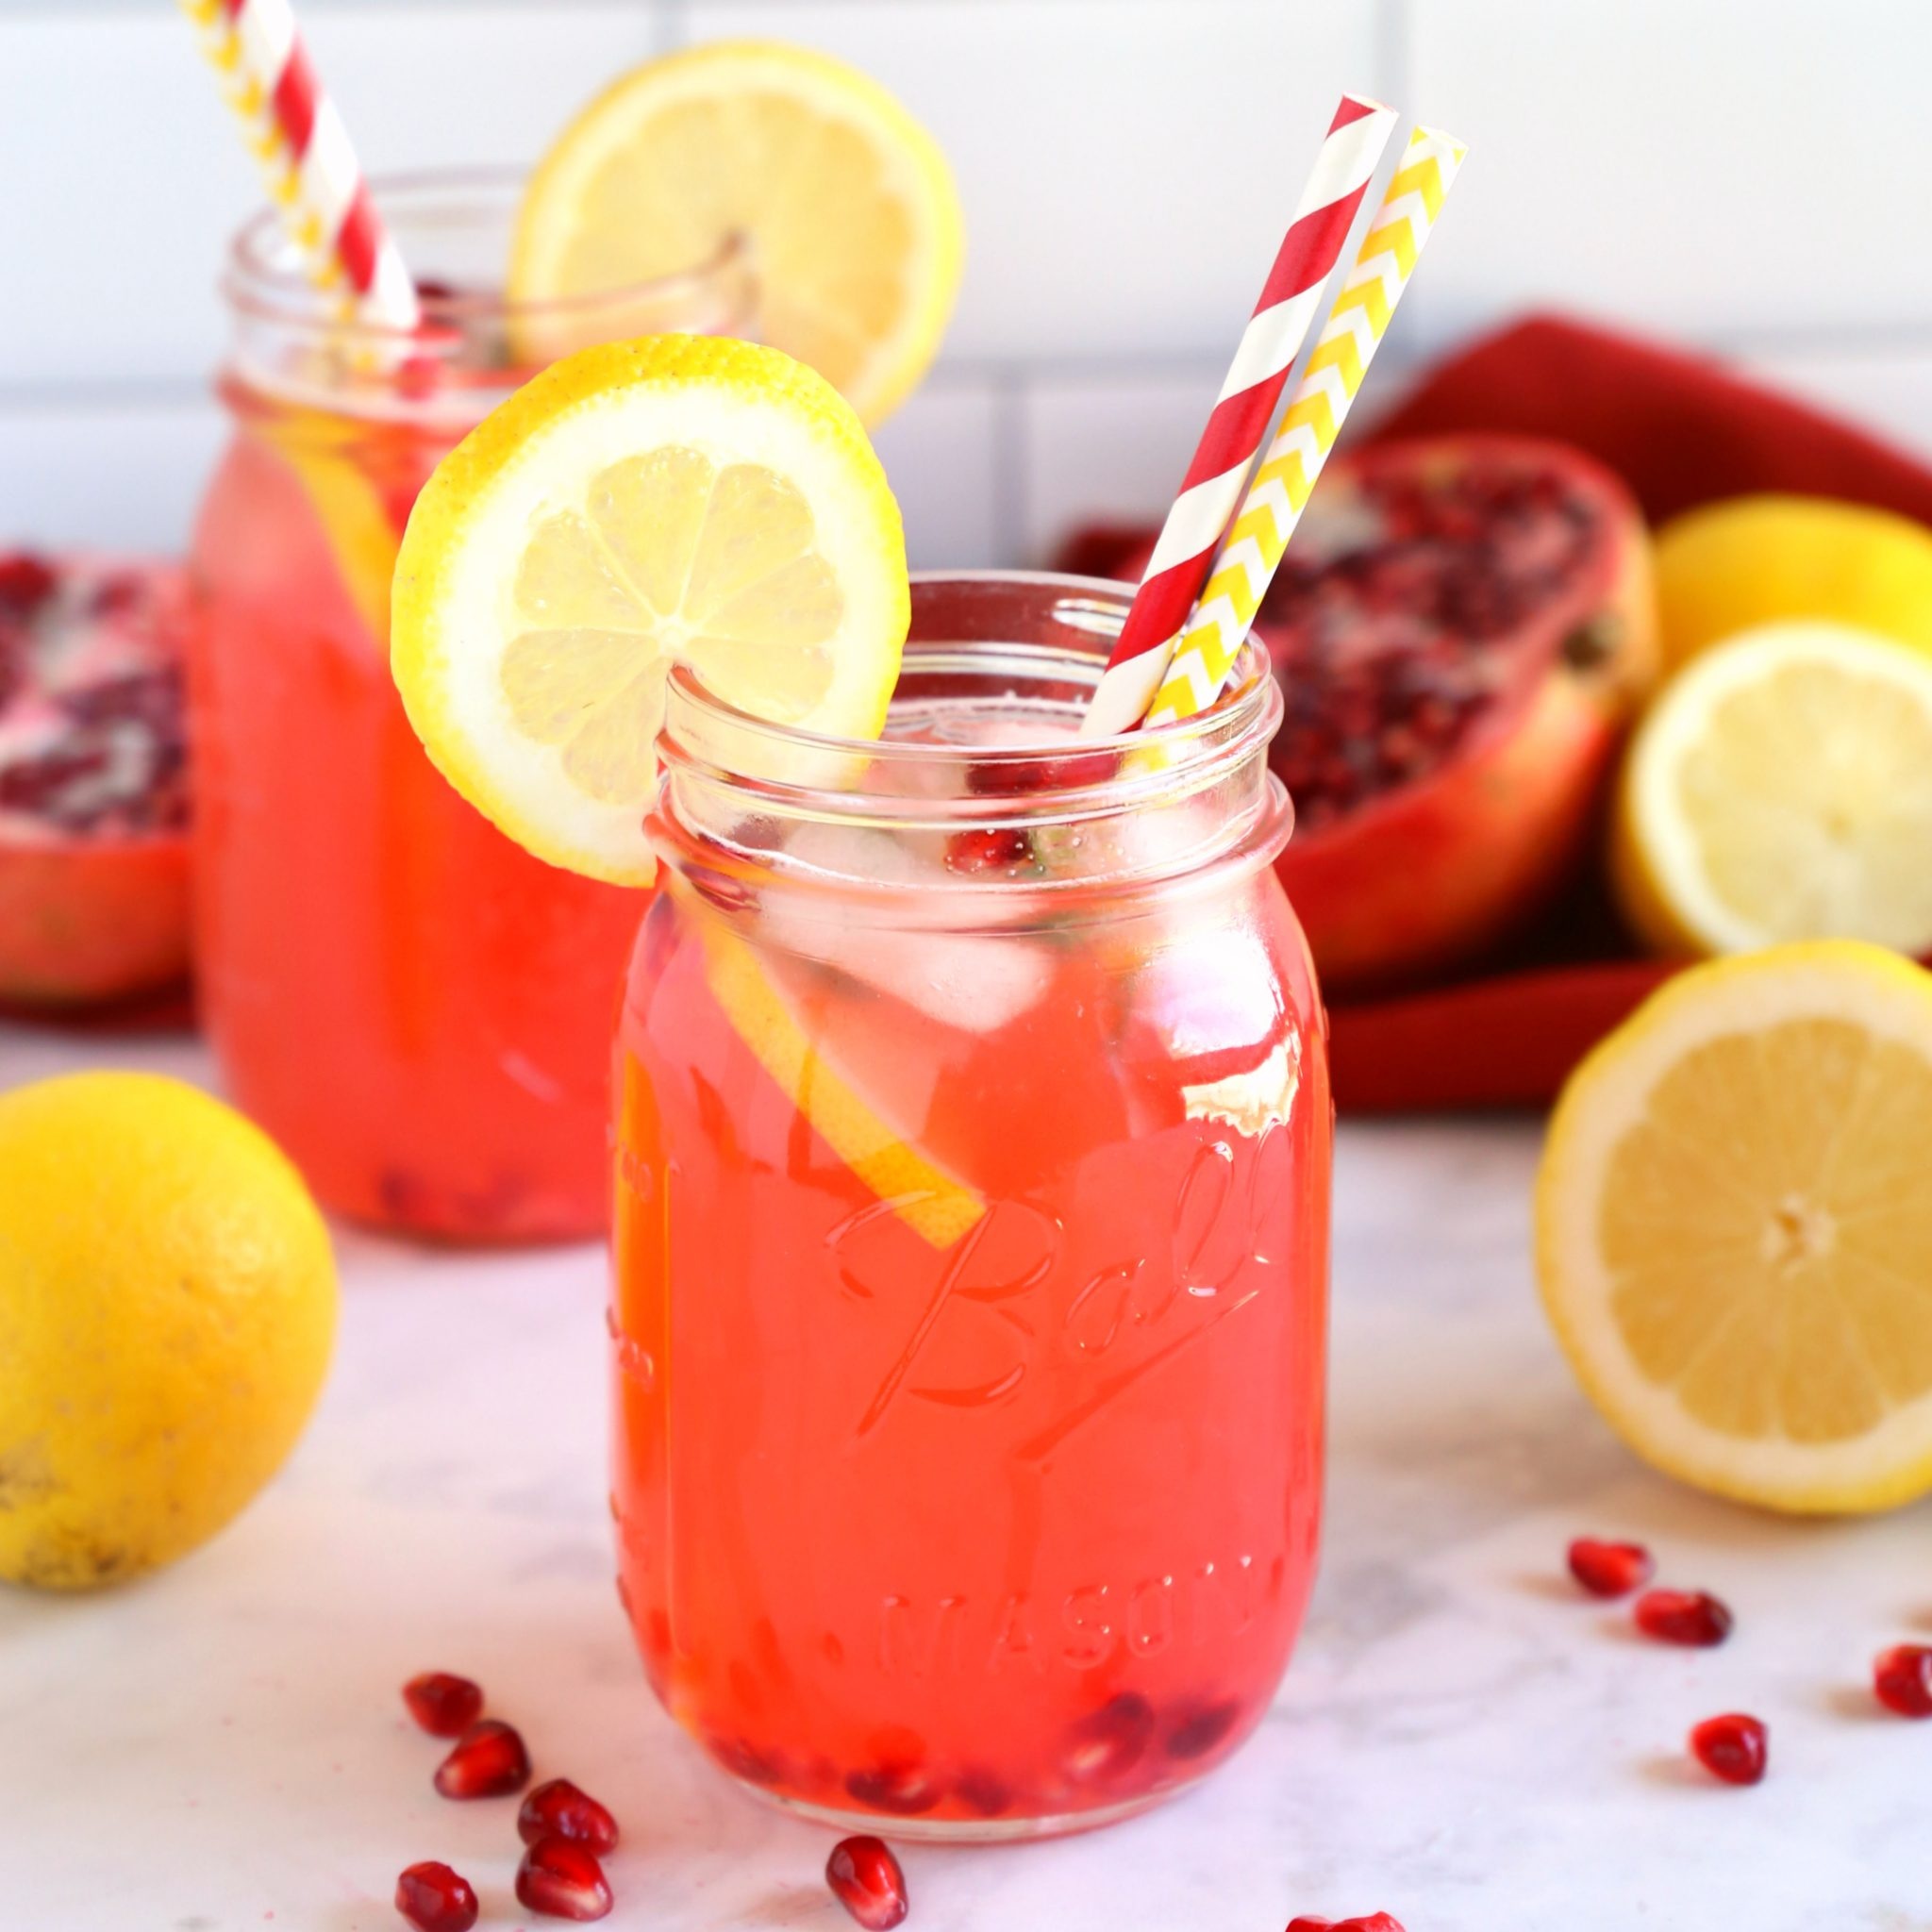 Lemonade: Pomegranate drink, Consumed as a refreshing drink during hot weather. 2050x2050 HD Wallpaper.